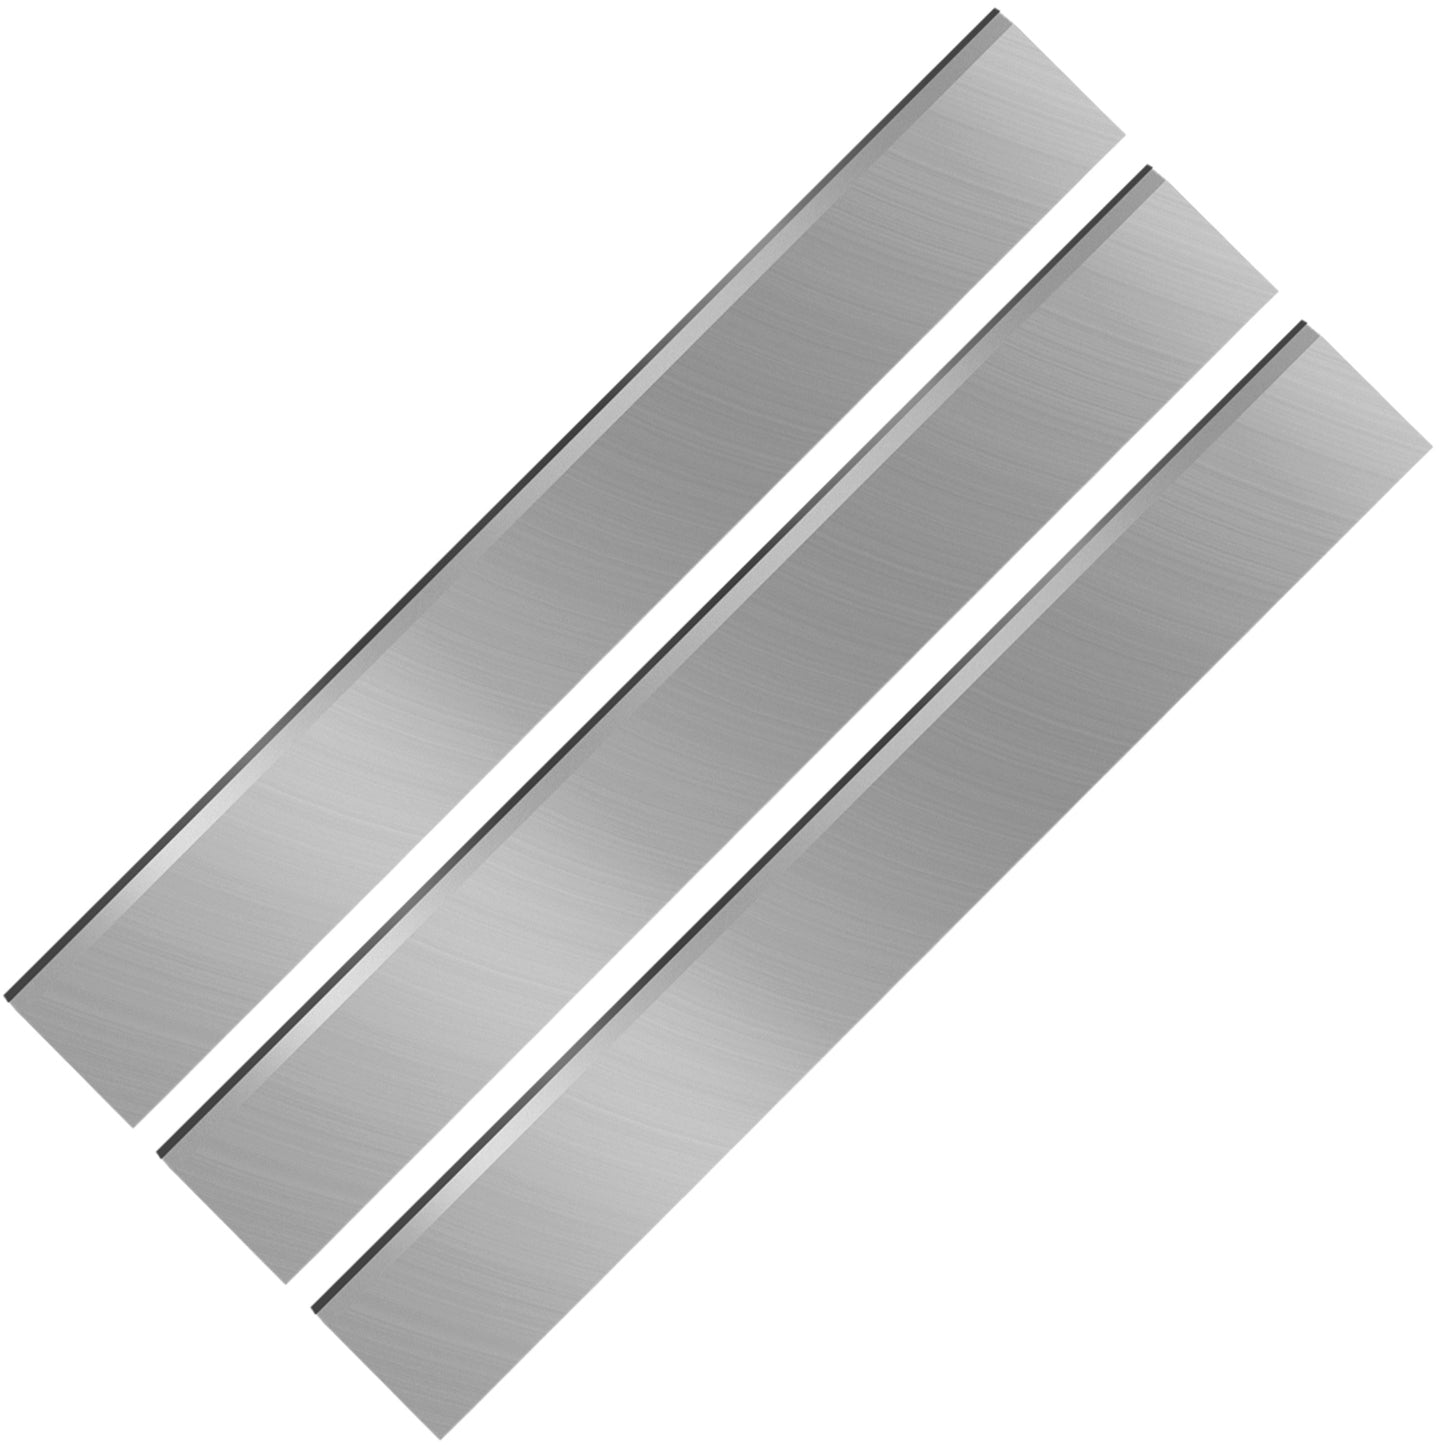 6" Inch TCT/ HSS Planer Blades Replacement Knives Cutters for Jointer Planer, 3Pcs, 150x25x3mm